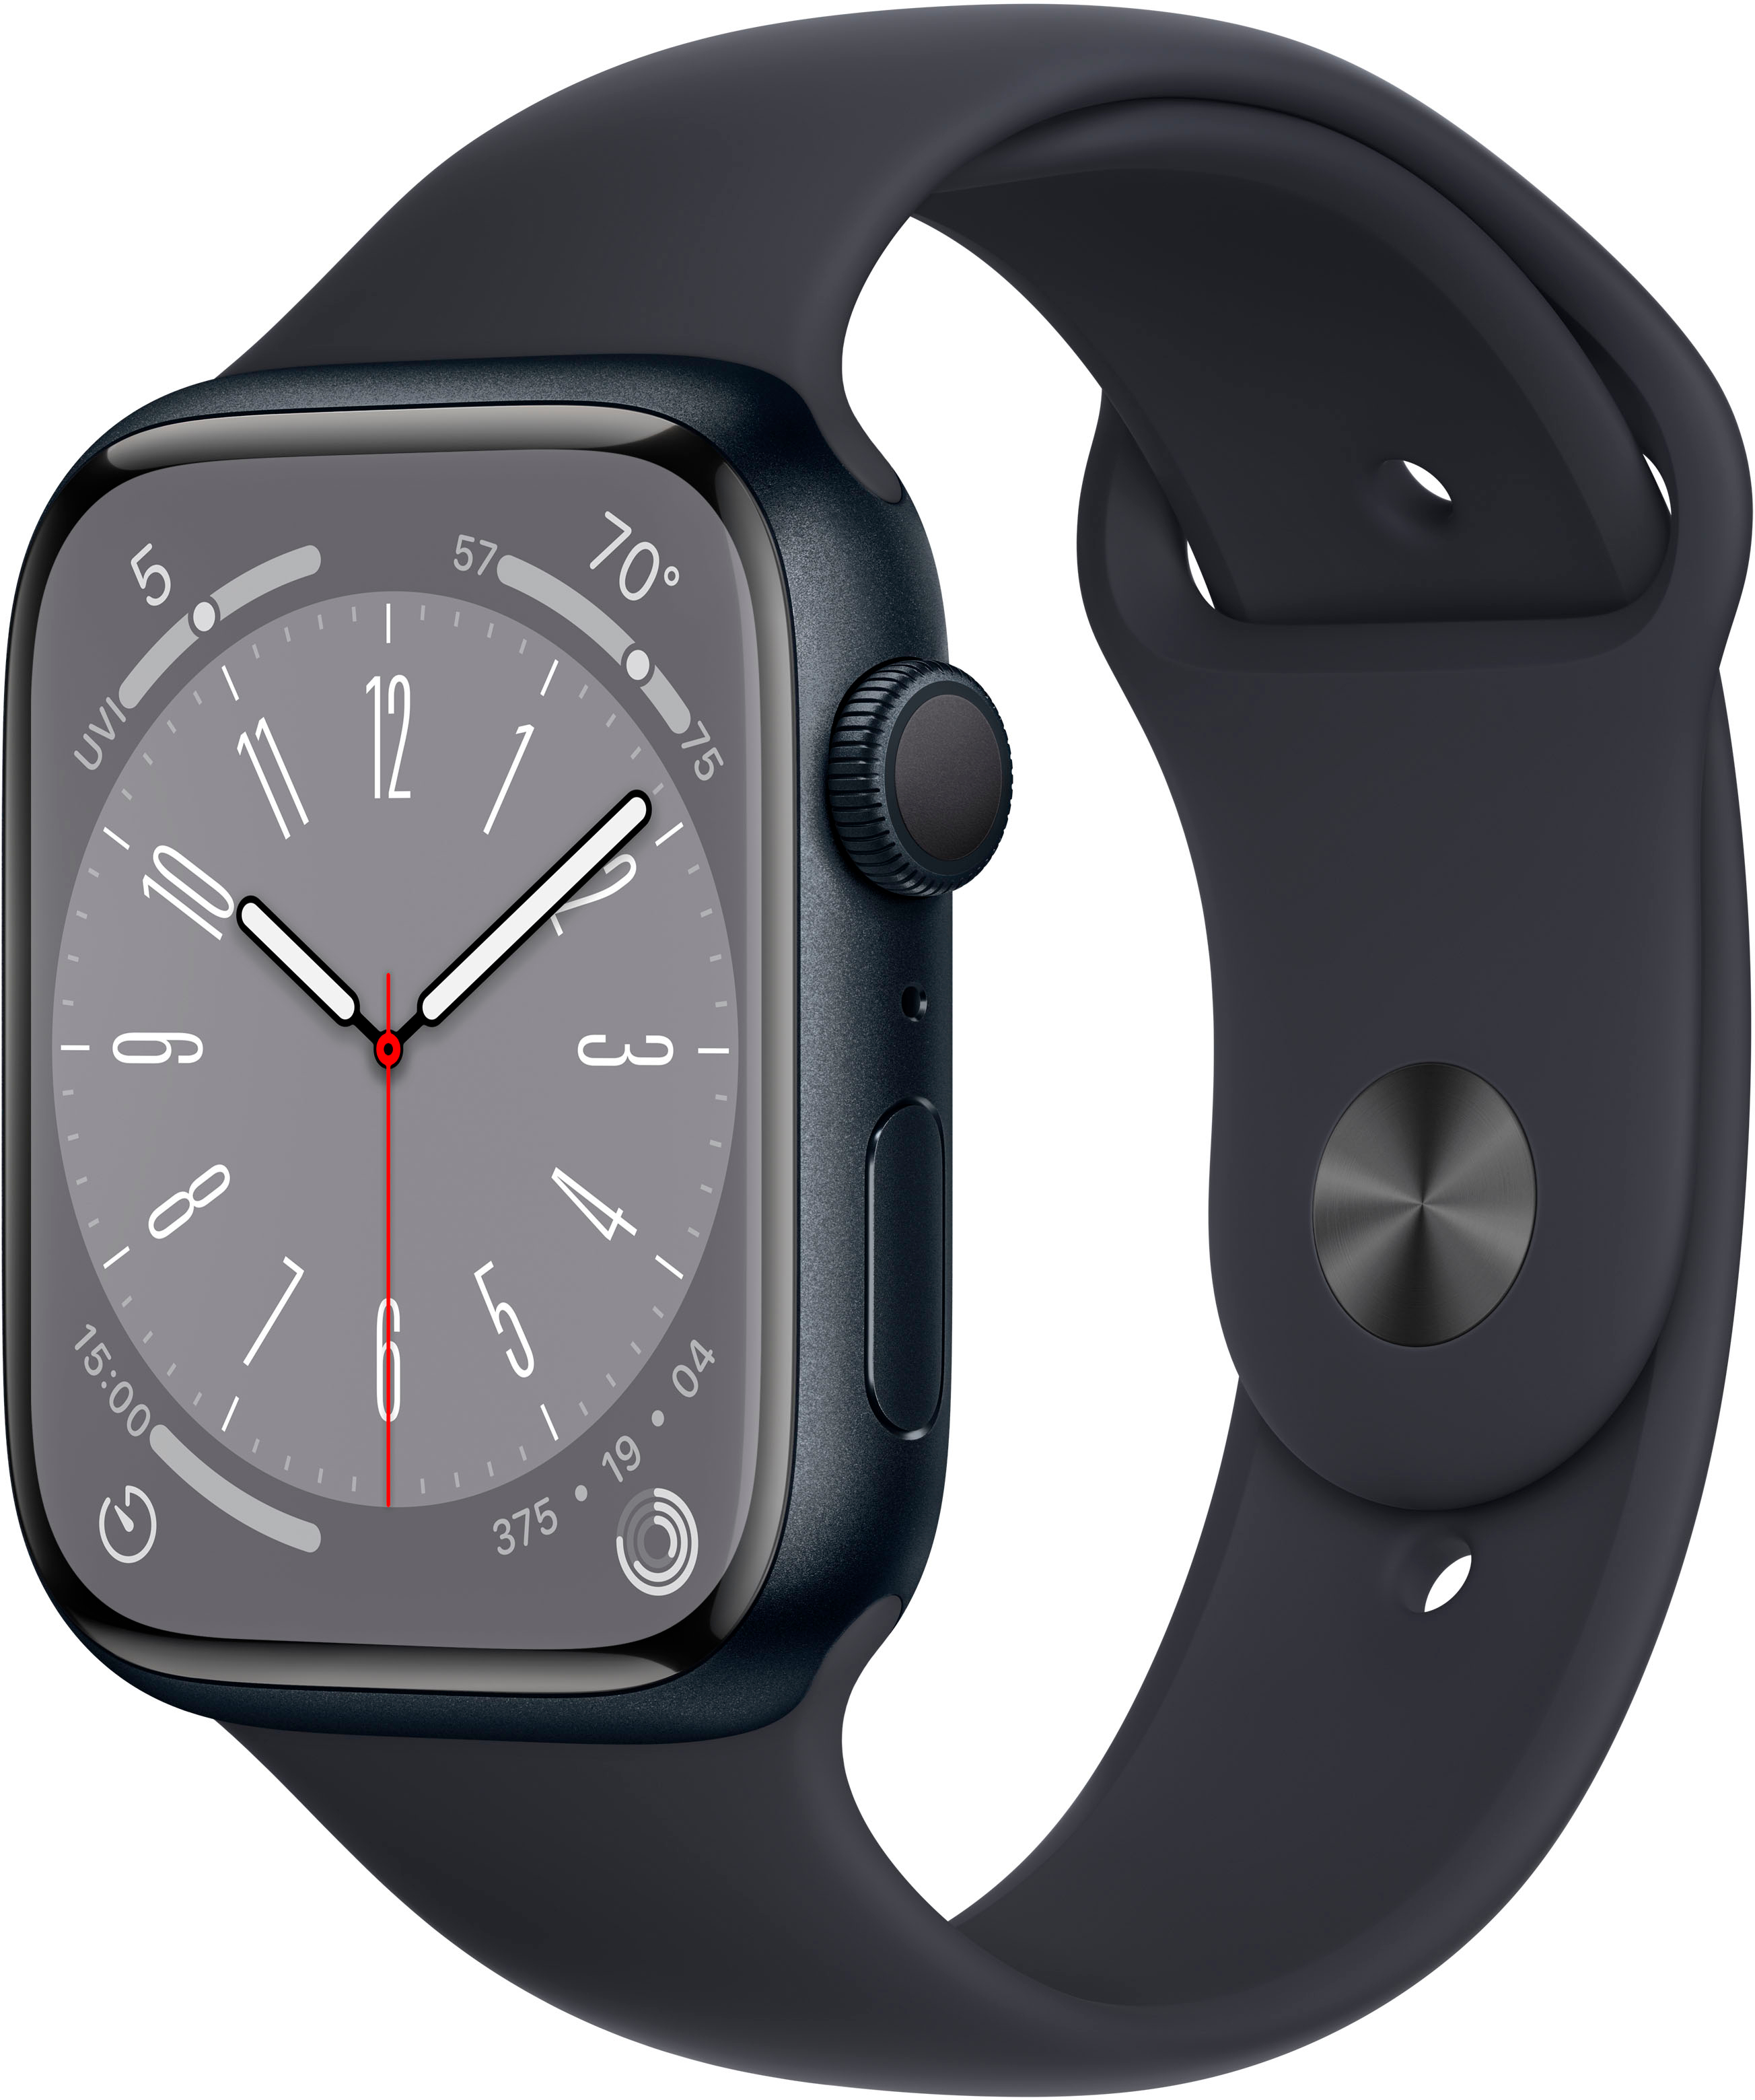 Apple Watch Series 8 (GPS 45mm) gets $85 off the price at Best Buy